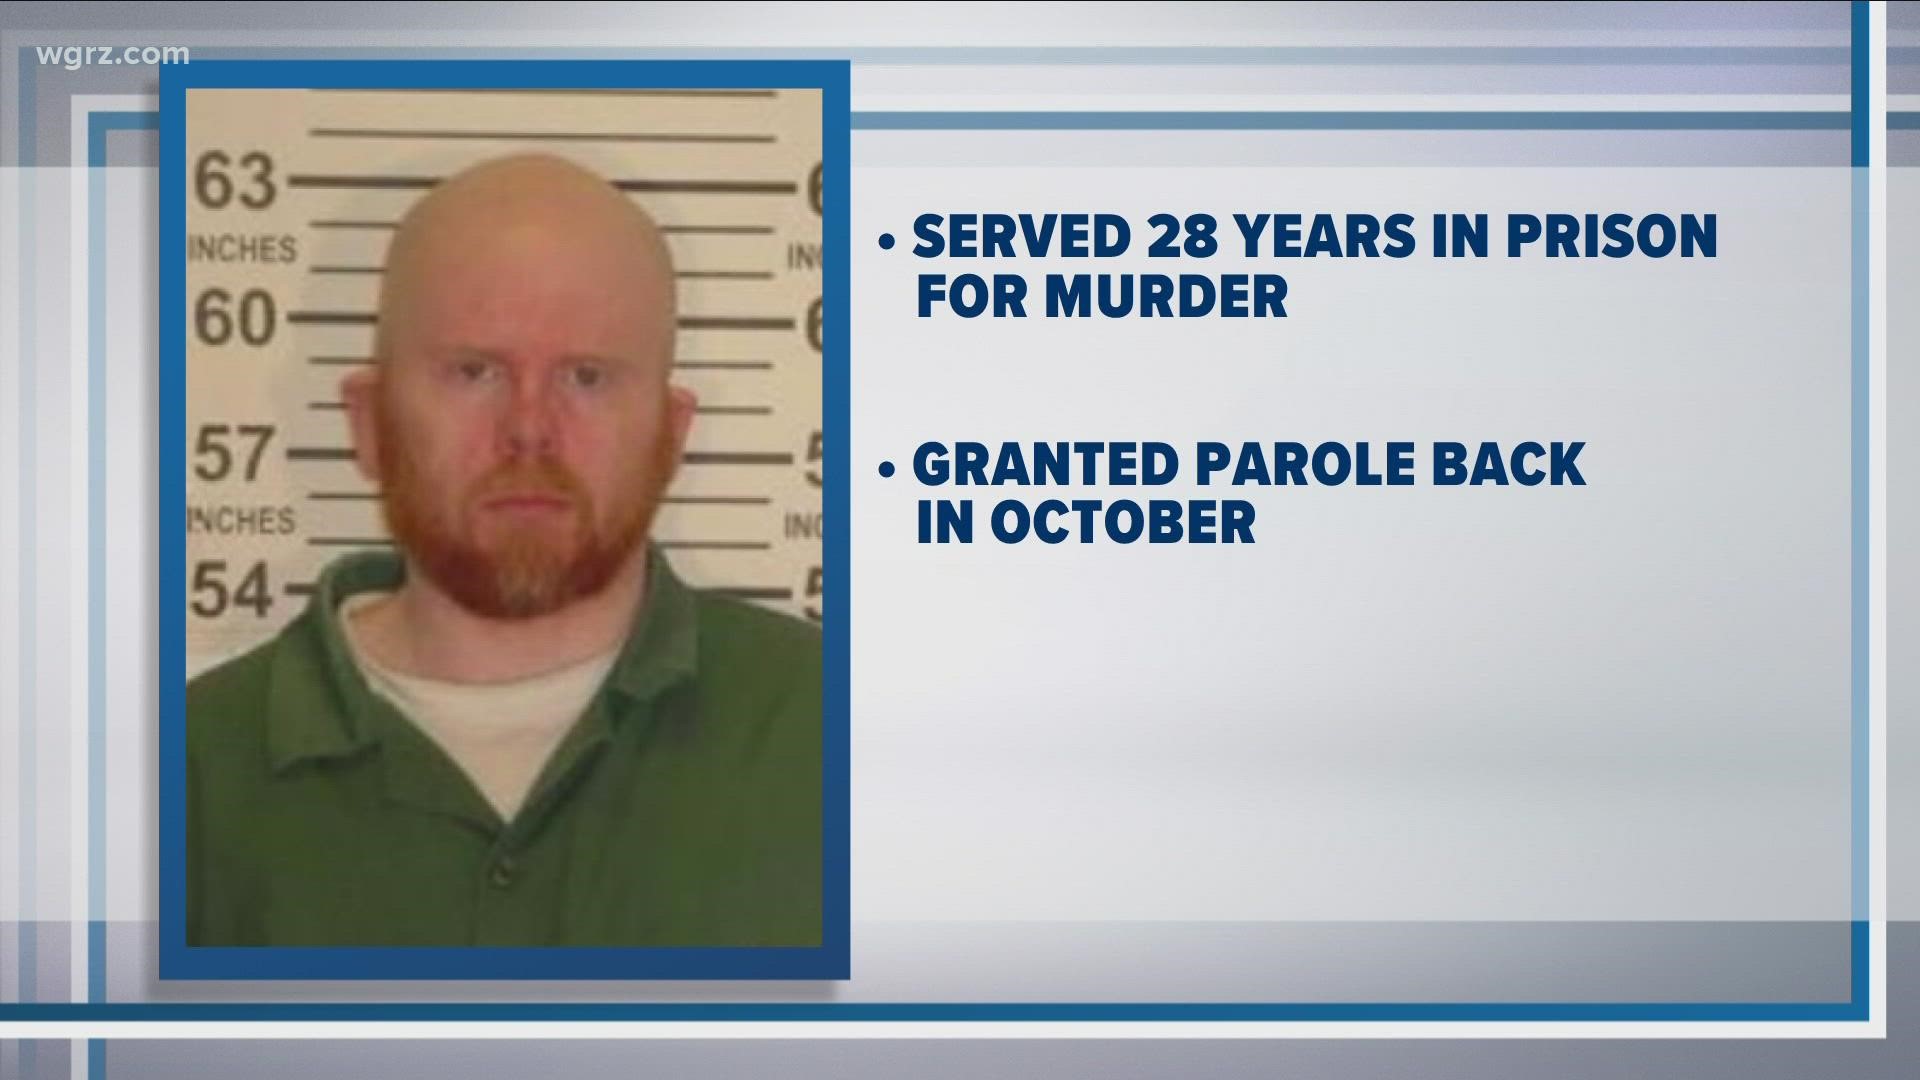 Smith served 28 years in prison for the murder and was granted parole back in October. The parole board cited his age at the time of the crime.